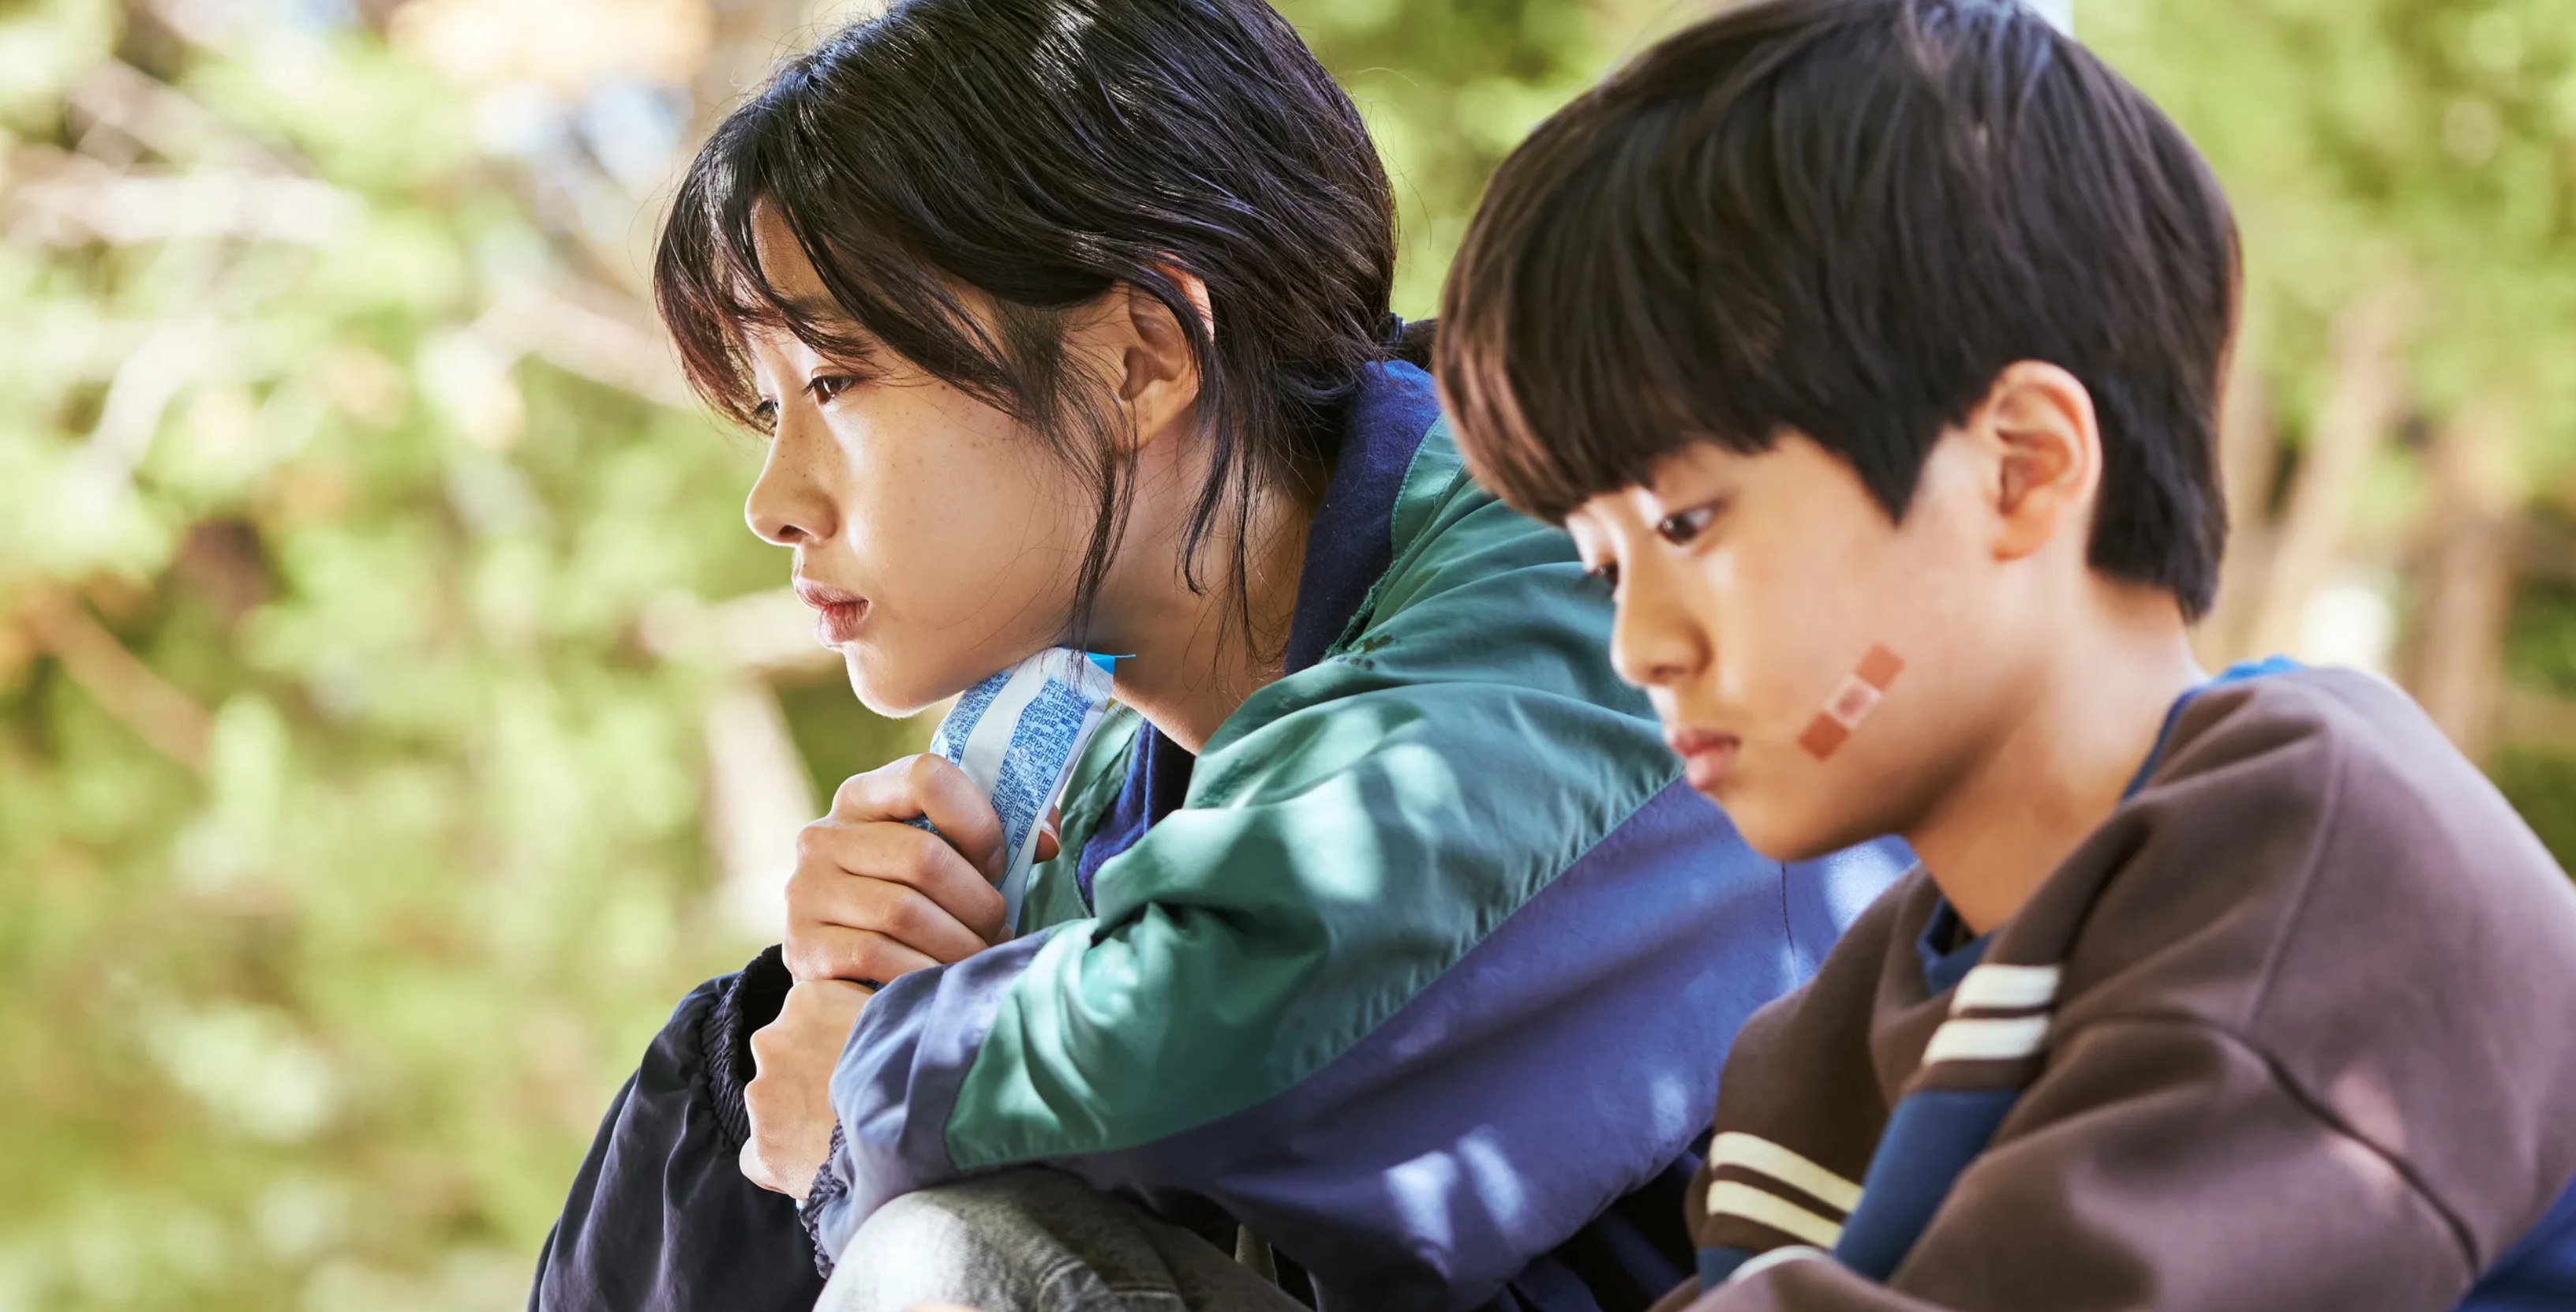 HoYeon Jung as Kang Sae-byeok for 'Squid Game' sitting next to young boy.